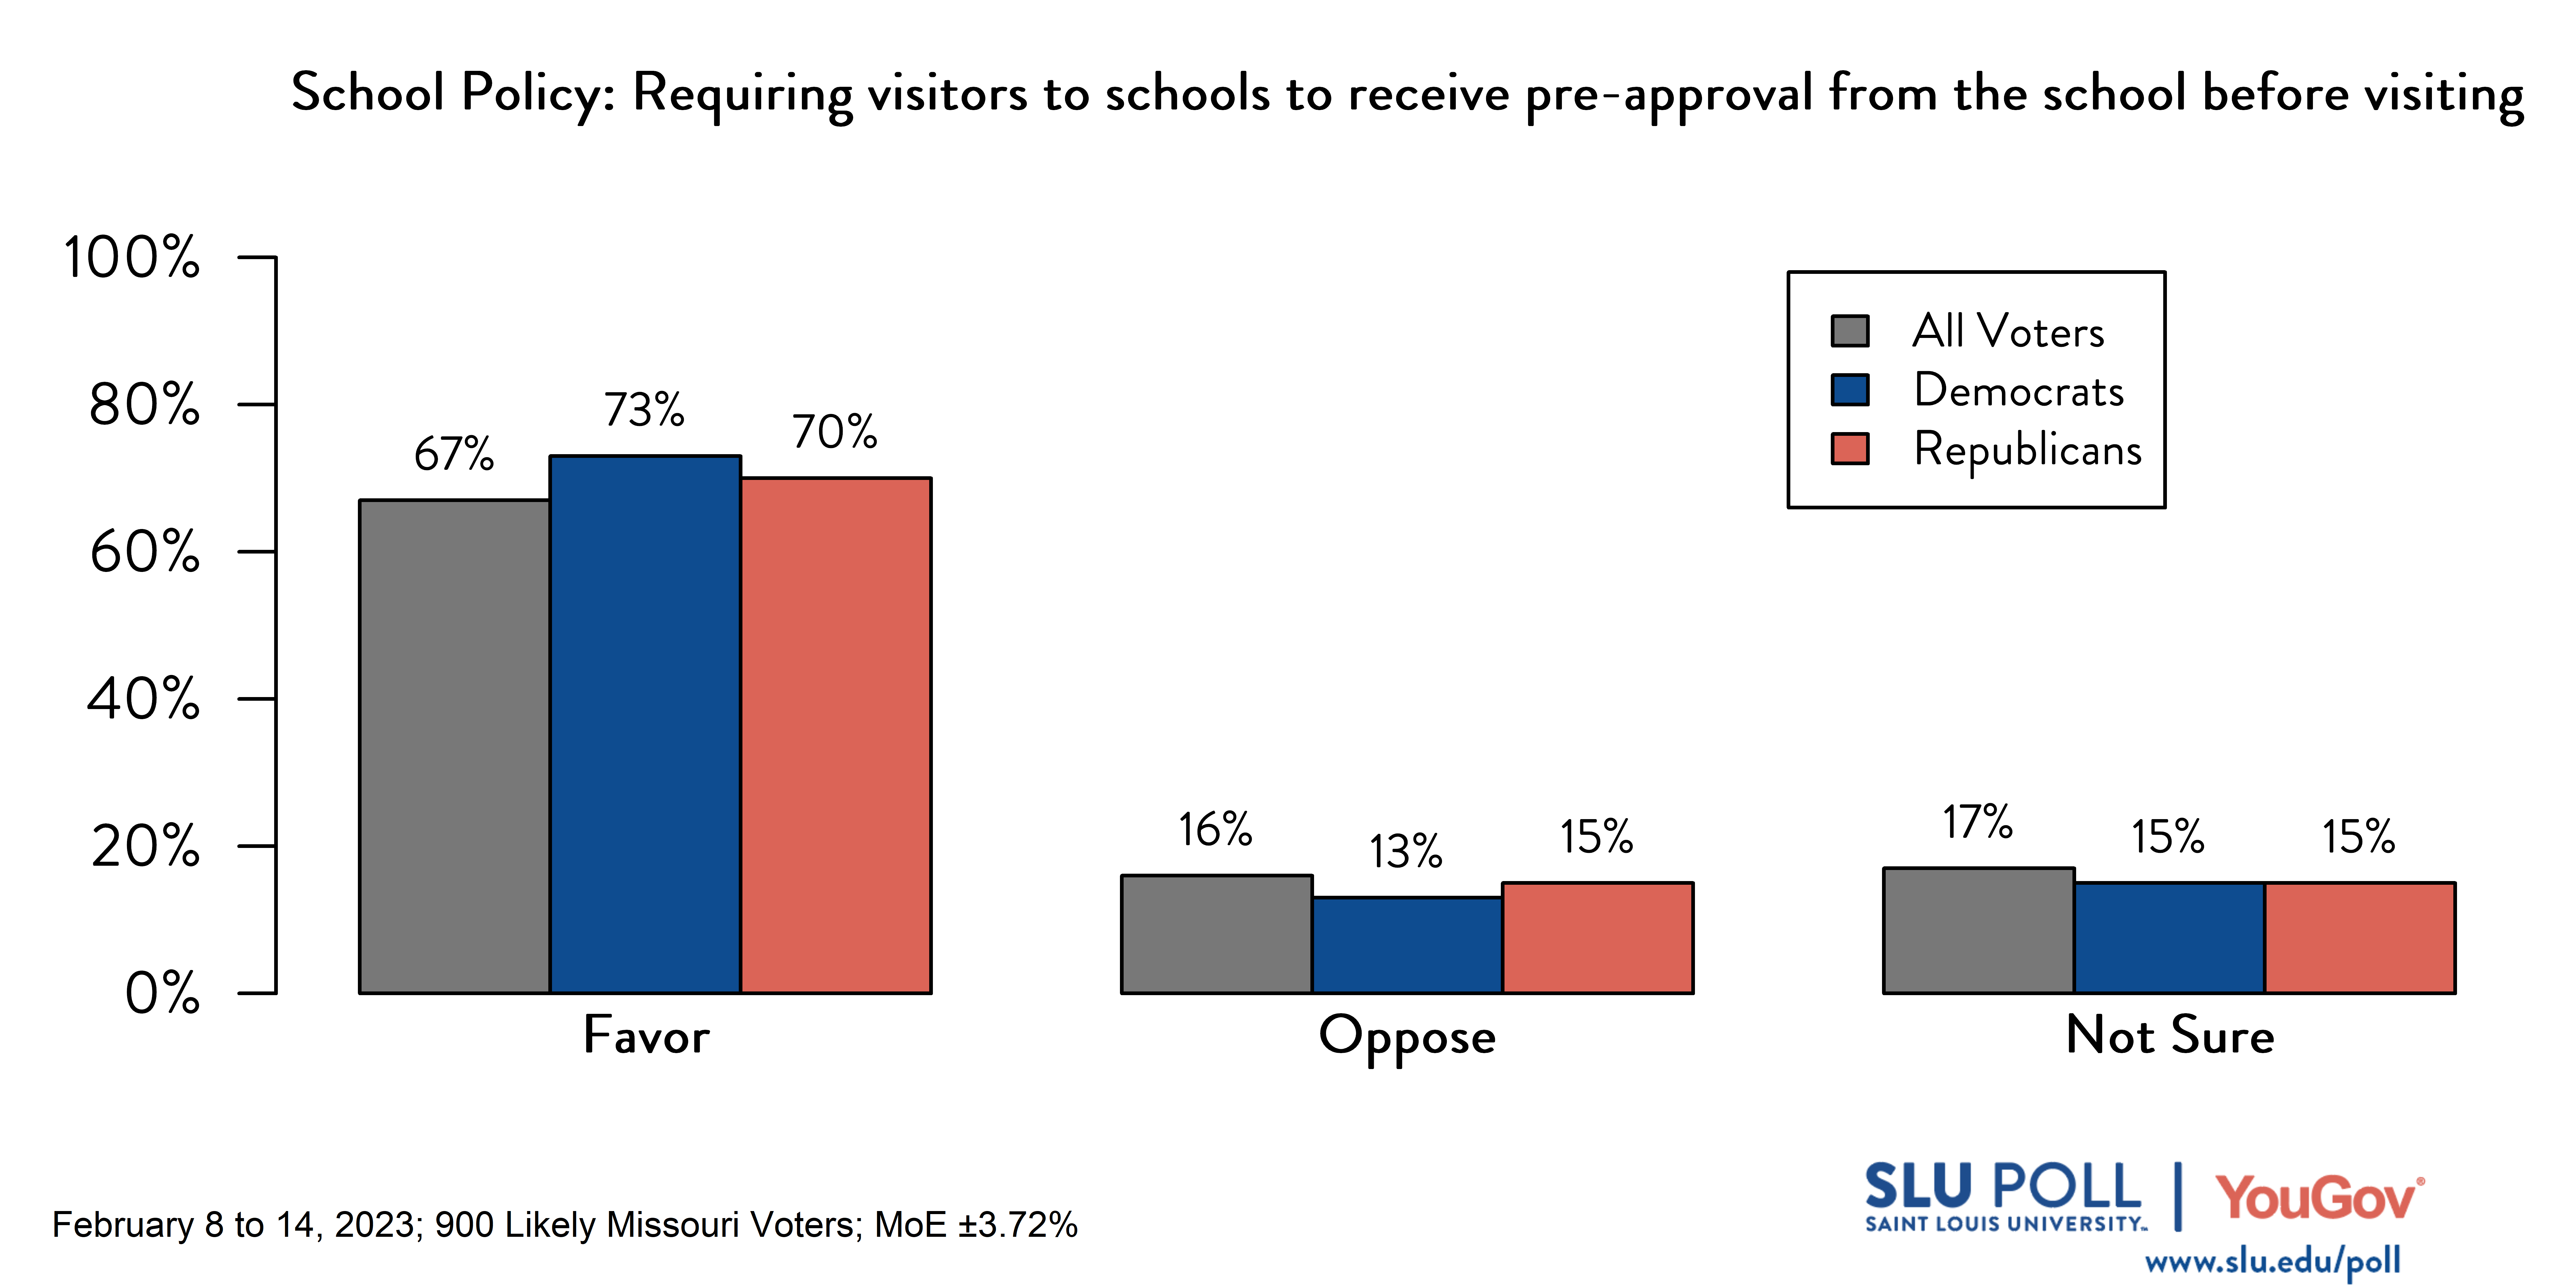 Likely voters' responses to 'Do you favor or oppose the following policies in schools: Requiring visitors to schools to receive pre-approval from the school before visiting?': 67% Favor, 16% Oppose, and 17% Not sure. Democratic voters' responses: ' 73% Favor, 13% Oppose, and 15% Not sure. Republican voters' responses: 70% Favor, 15% Oppose, and 15% Not sure.